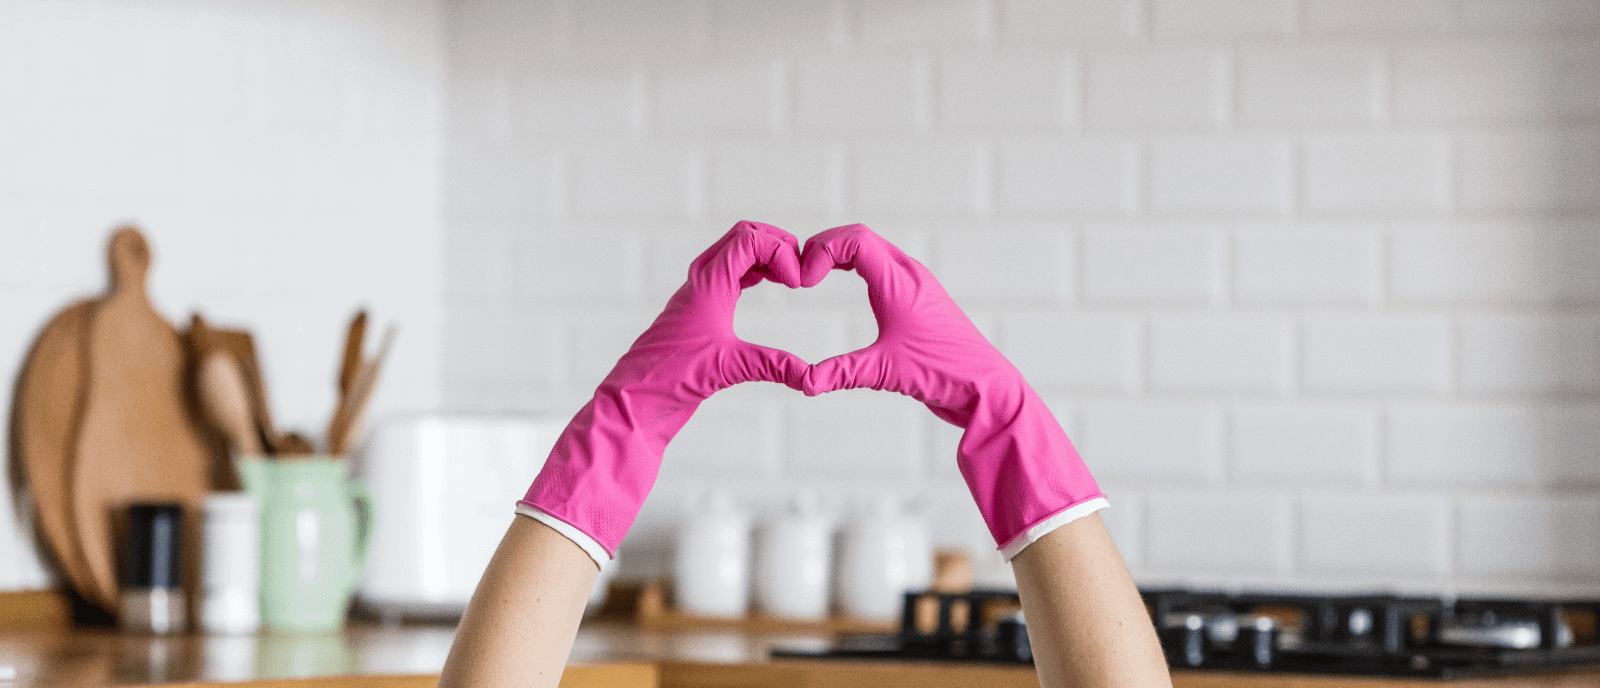 Two hands making a heart whilst wearing hot pink kitchen gloves. Background shows a white kitchen wall with wooden countertop.